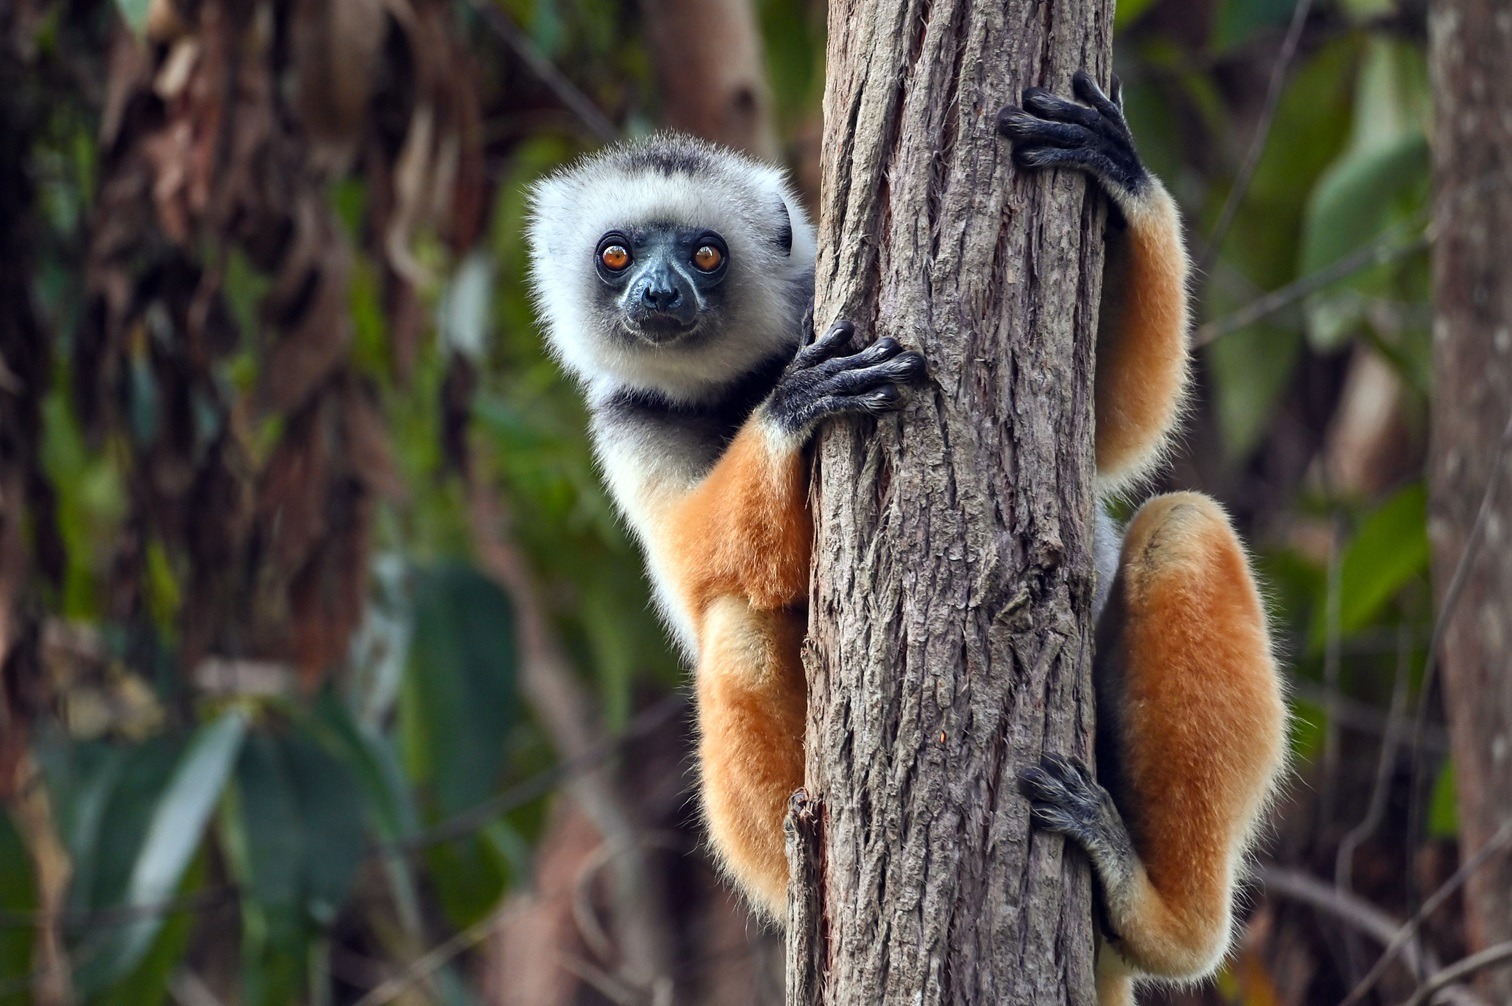 A diademed sifaka lemur peers out curiously from a Madagascar forest. Photo: mirecca/stock.adobe.com